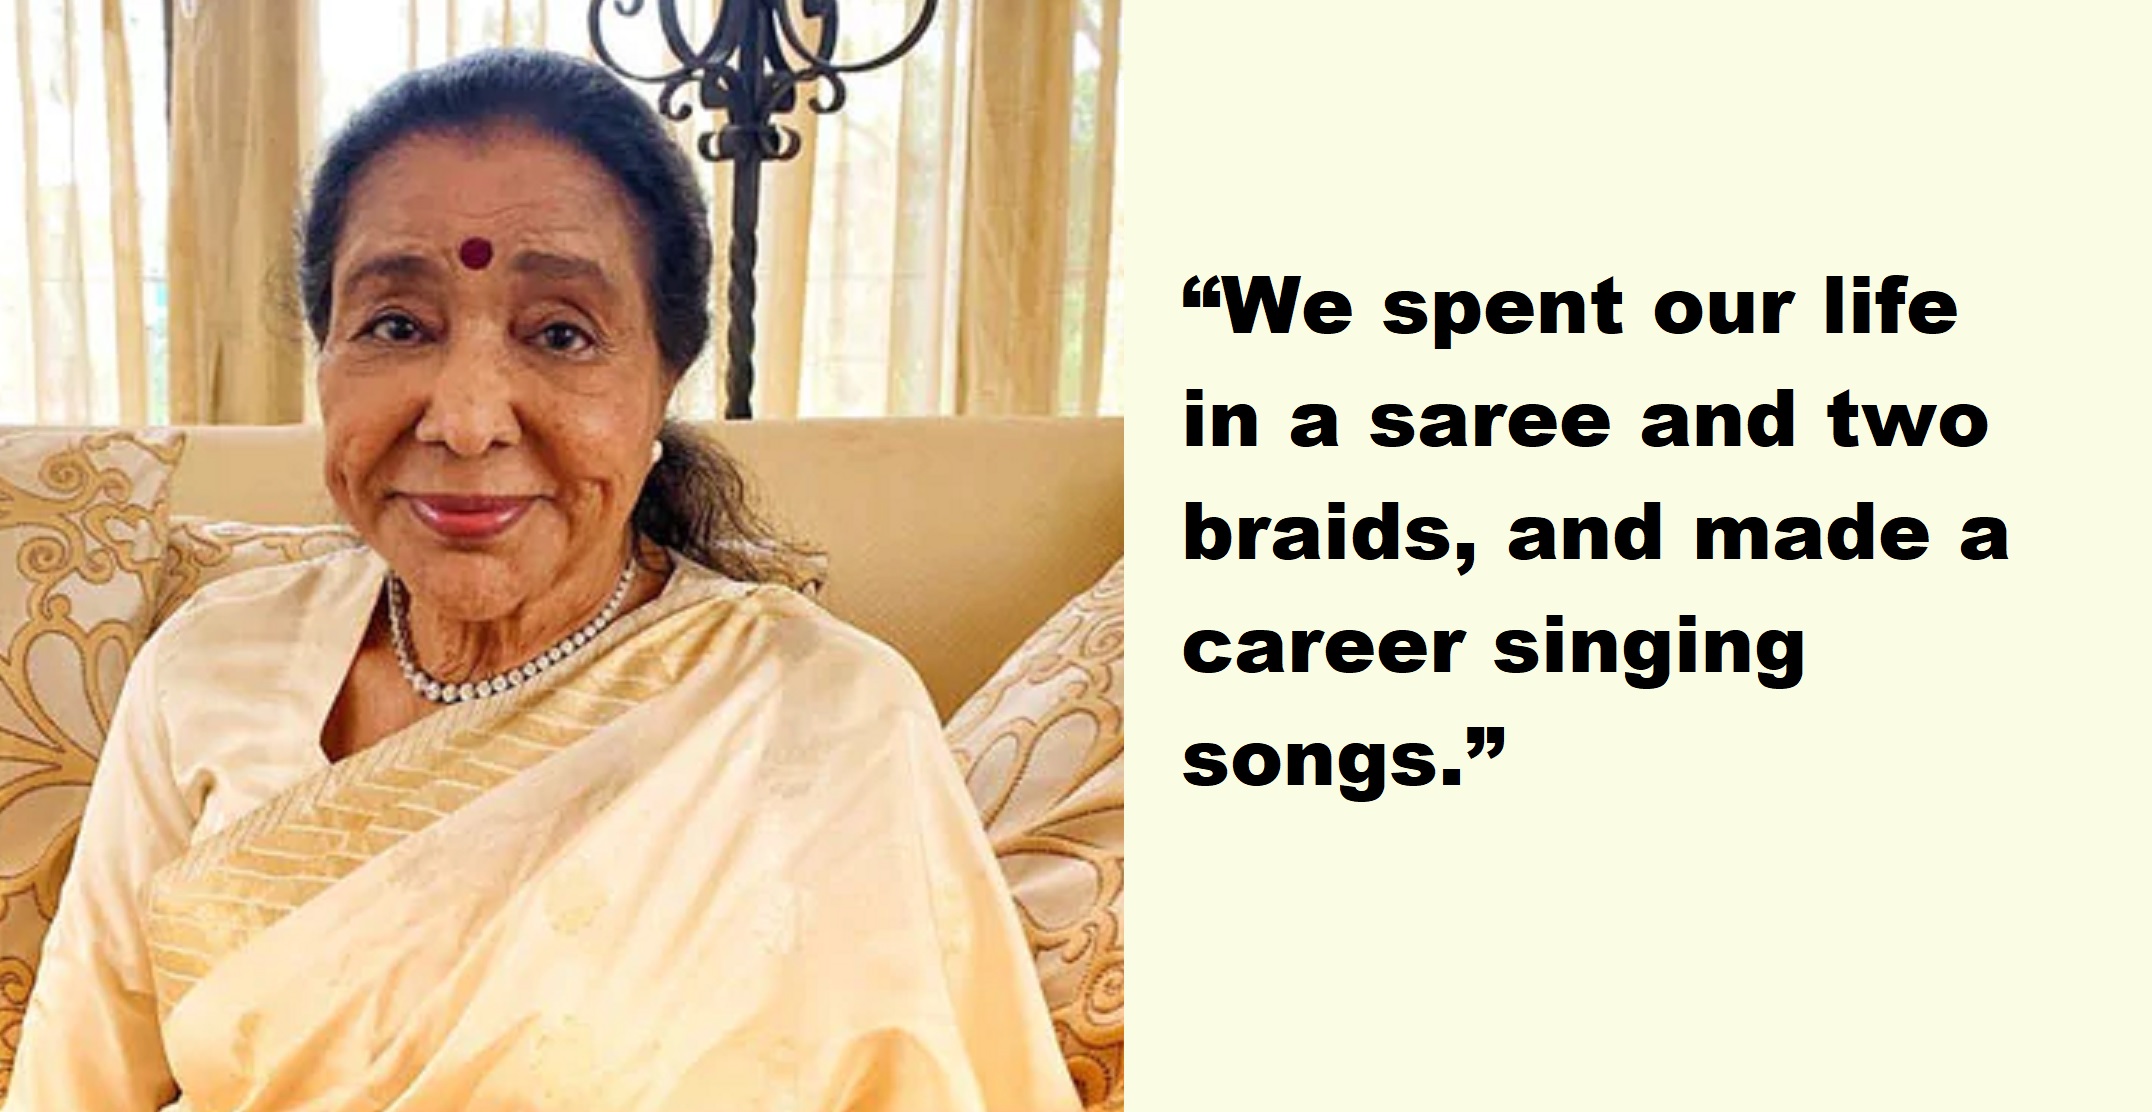 Asha Bhosle Criticizes Today’s Talent Shows For Focusing On ‘Fashion’ Rather Than ‘Singing’